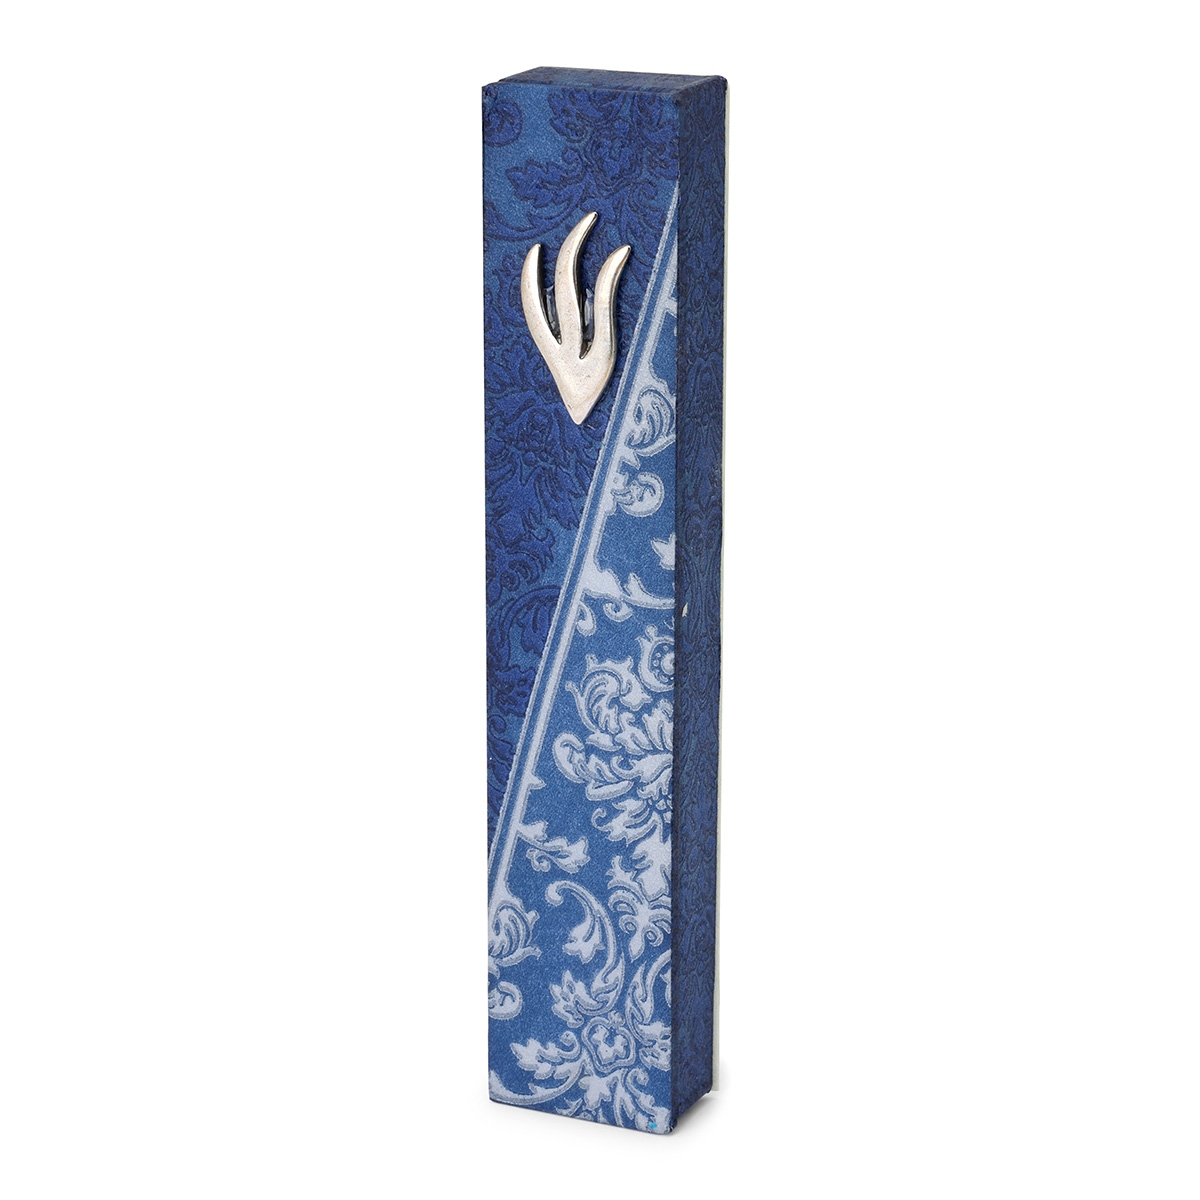 Lily Art Acrylic Mezuzah with Navy and White Damask Design - 1